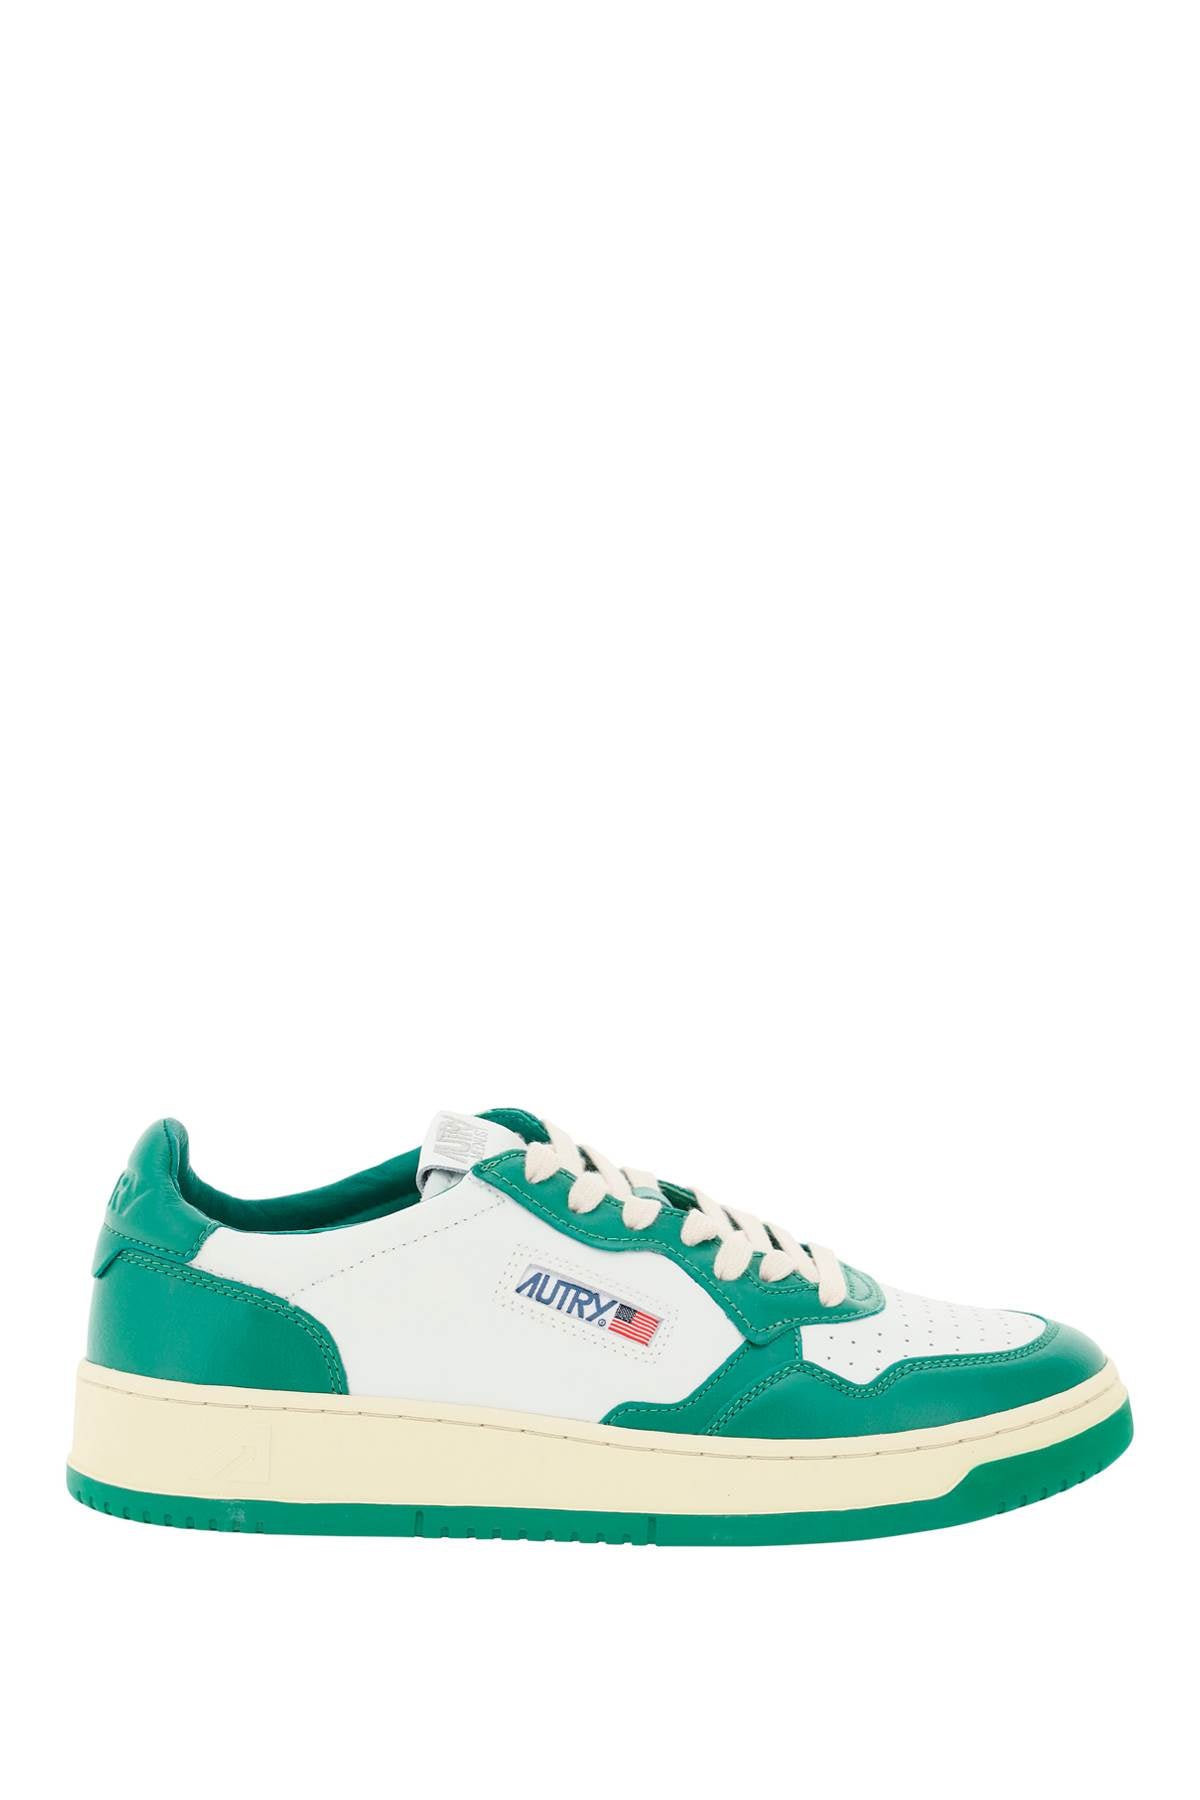 Autry leather medalist low sneakers-0